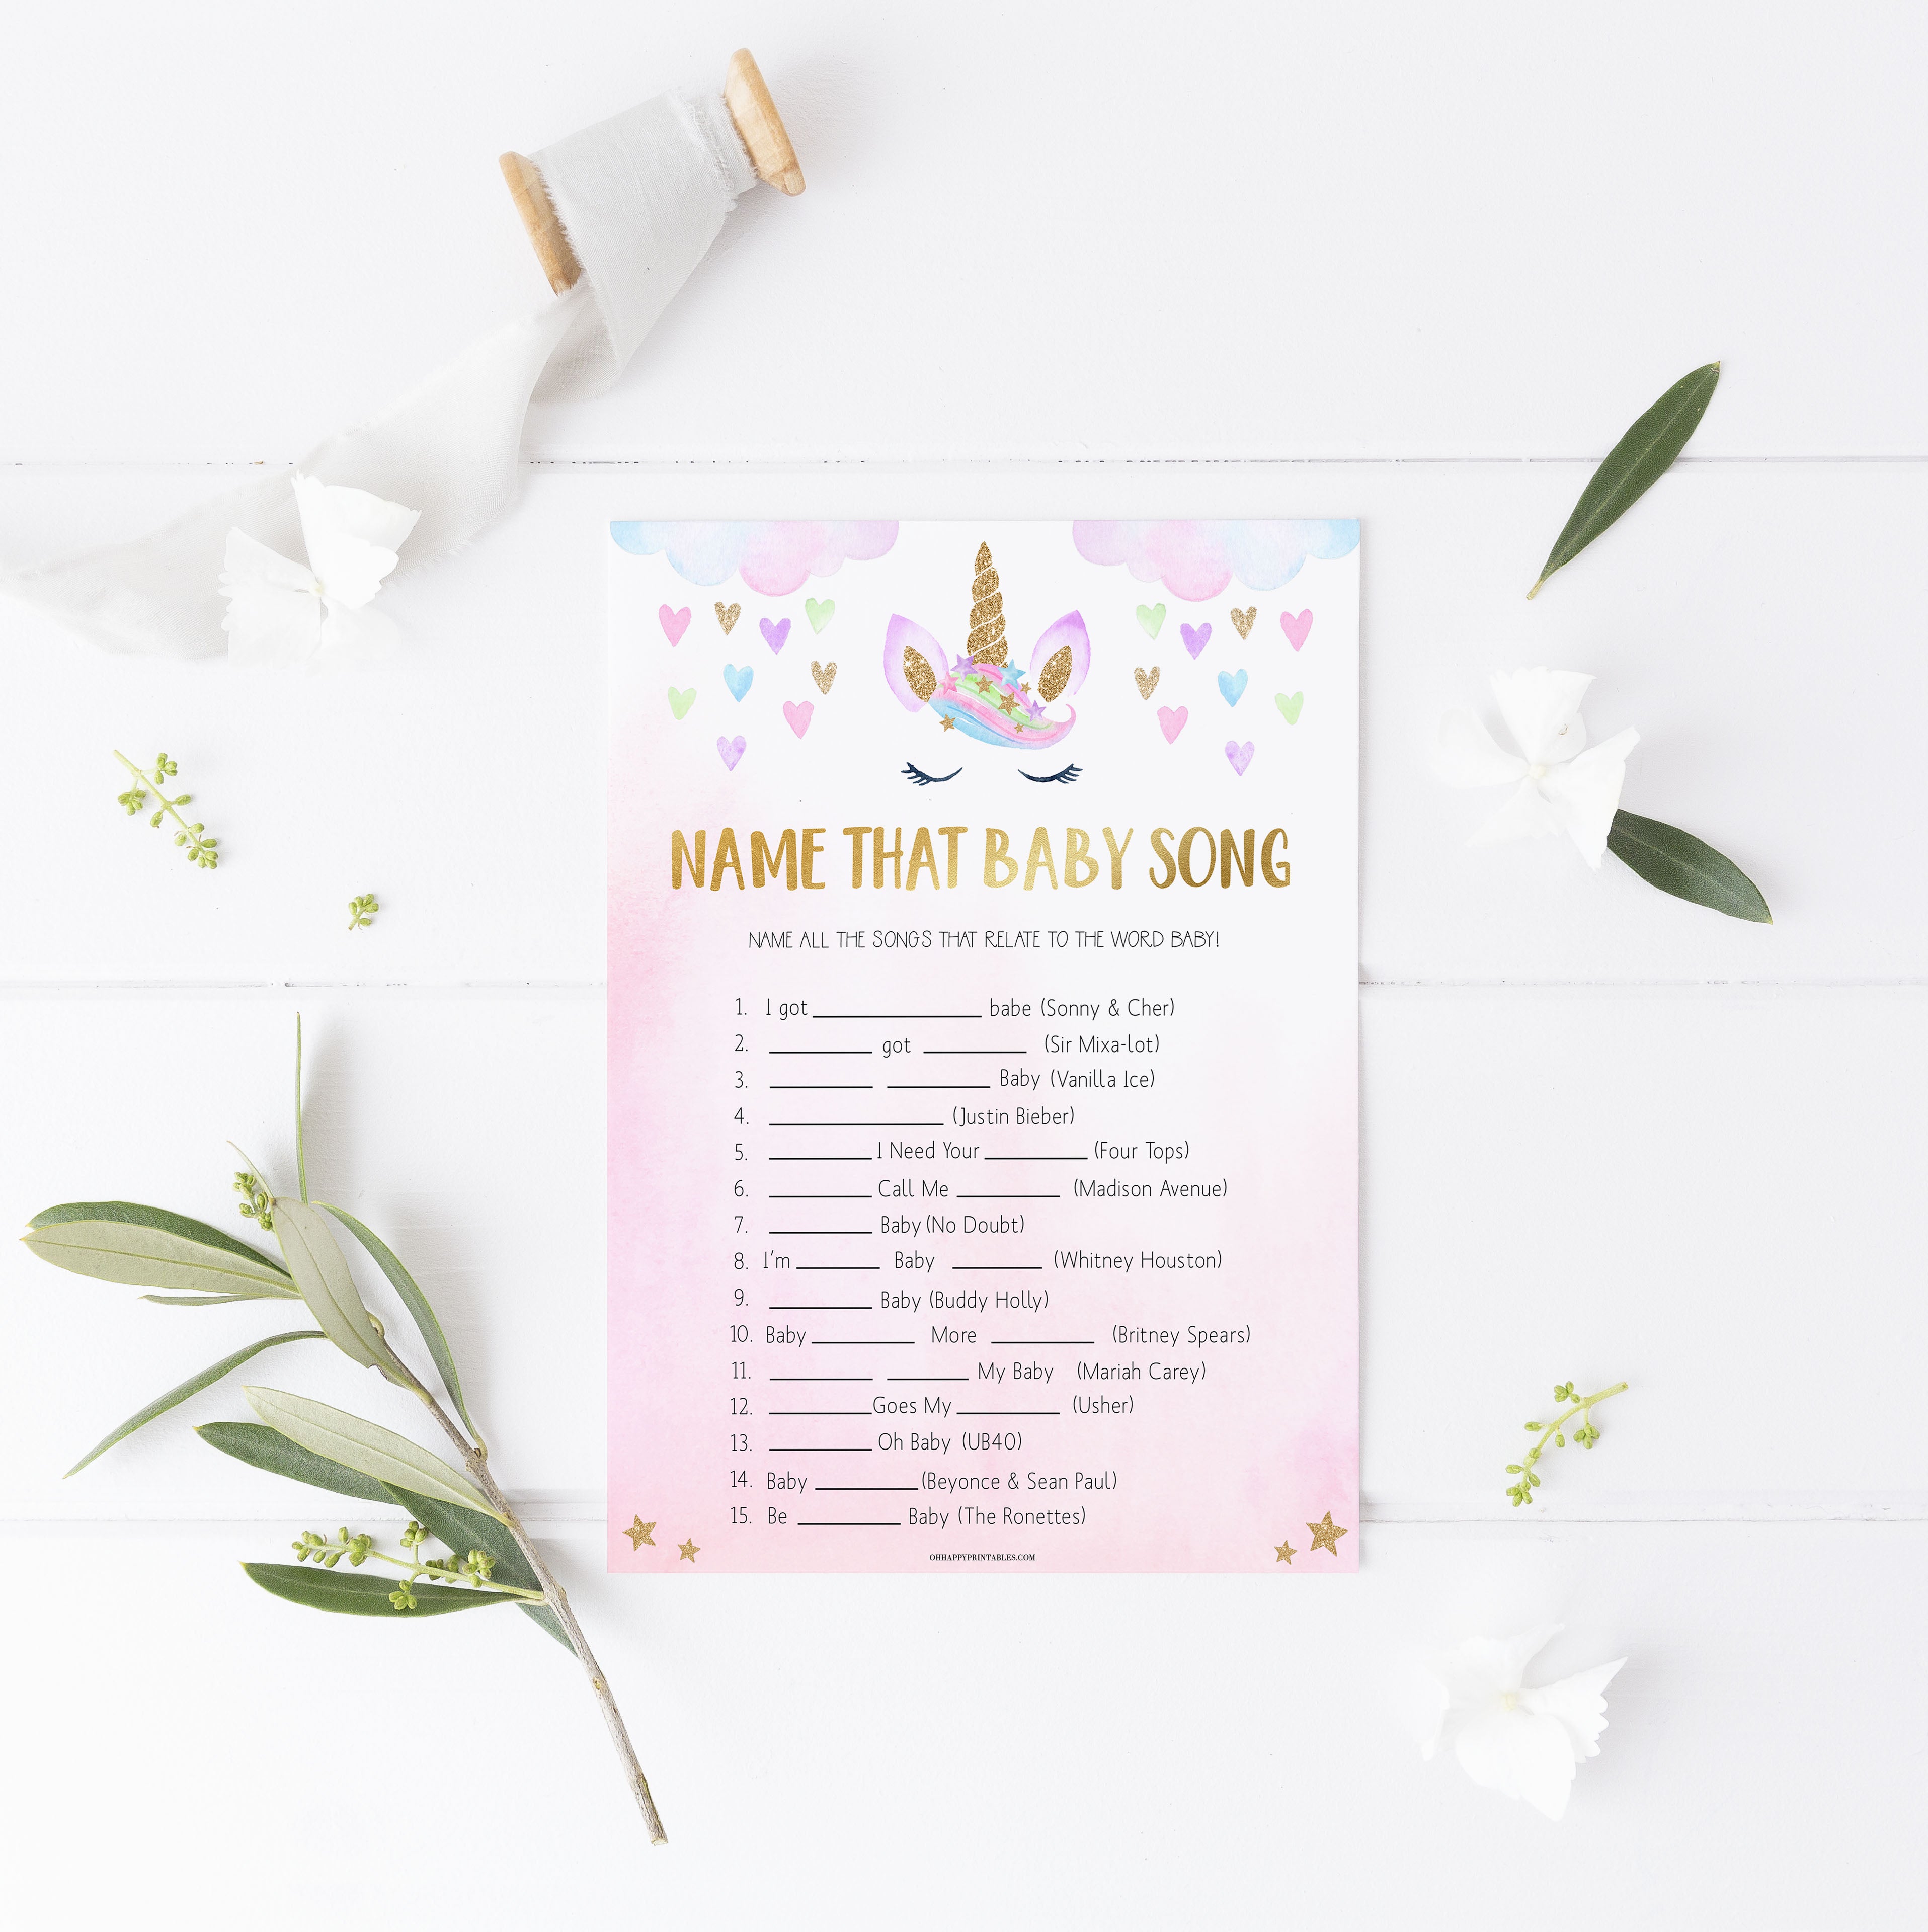 name that baby song game, Printable baby shower games, unicorn baby games, baby shower games, fun baby shower ideas, top baby shower ideas, unicorn baby shower, baby shower games, fun unicorn baby shower ideas